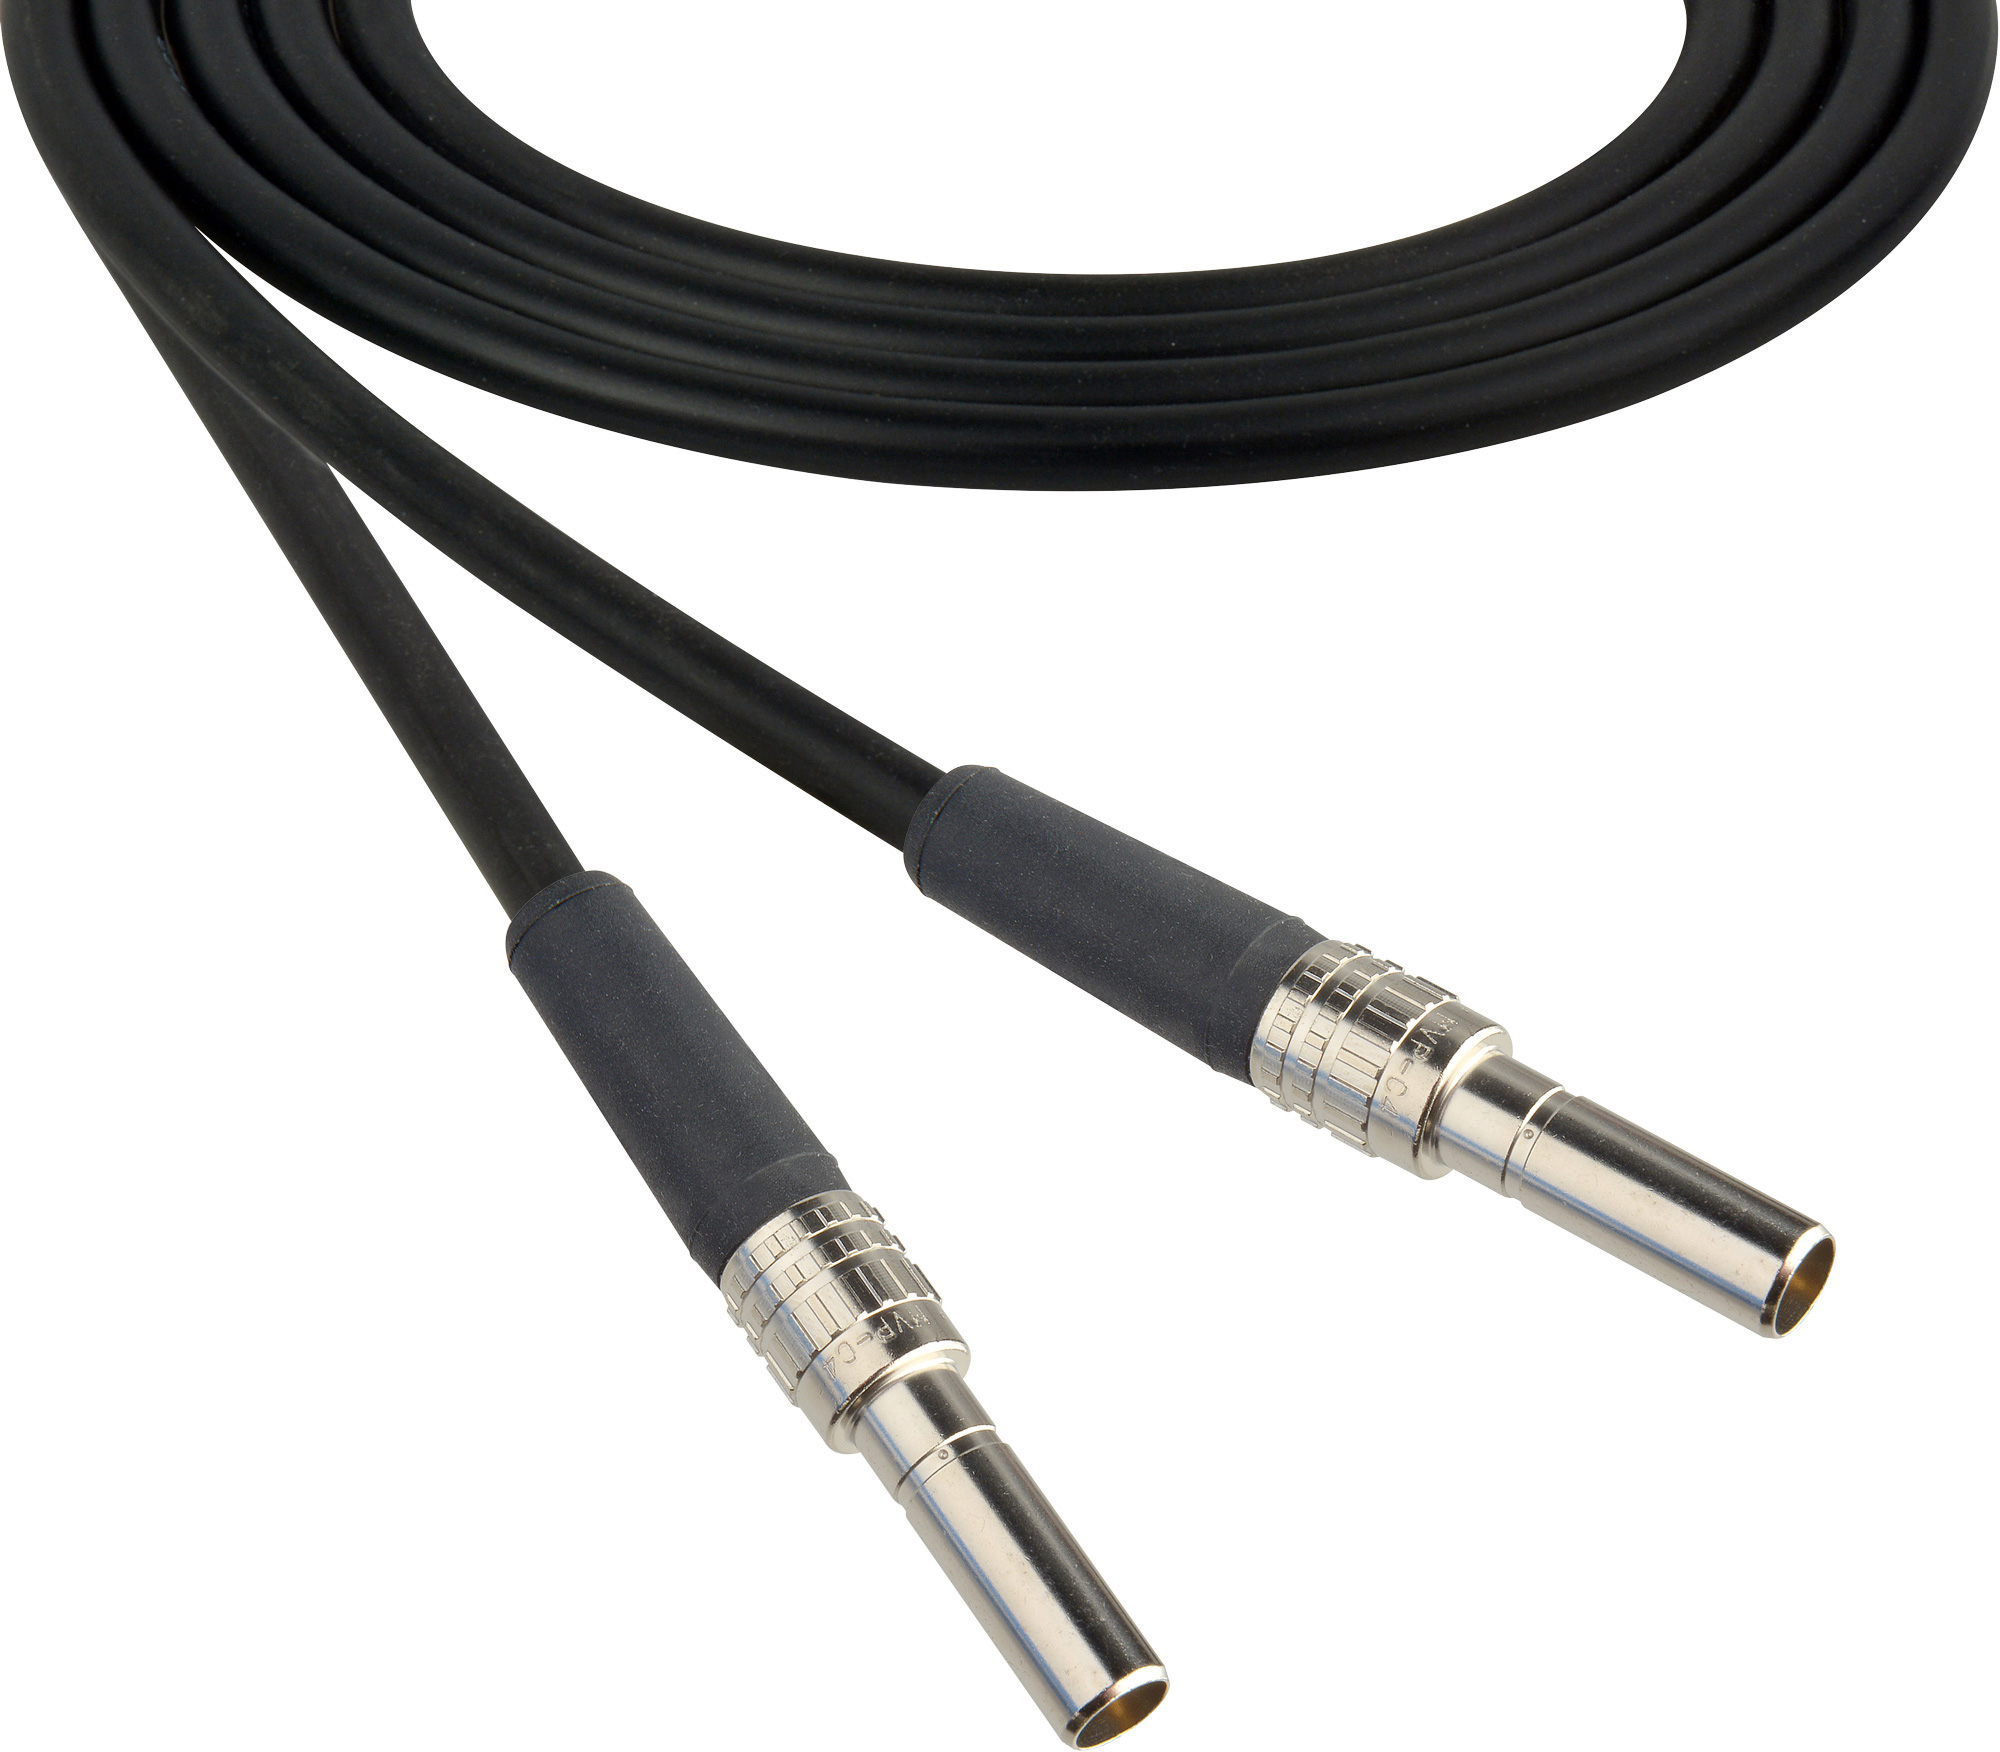 Laird MVP-MVP-BK60 Canare L-4CFB Mid-Size Video Patch Plug Male to Male Video Patch Cable - 5 Foot Black